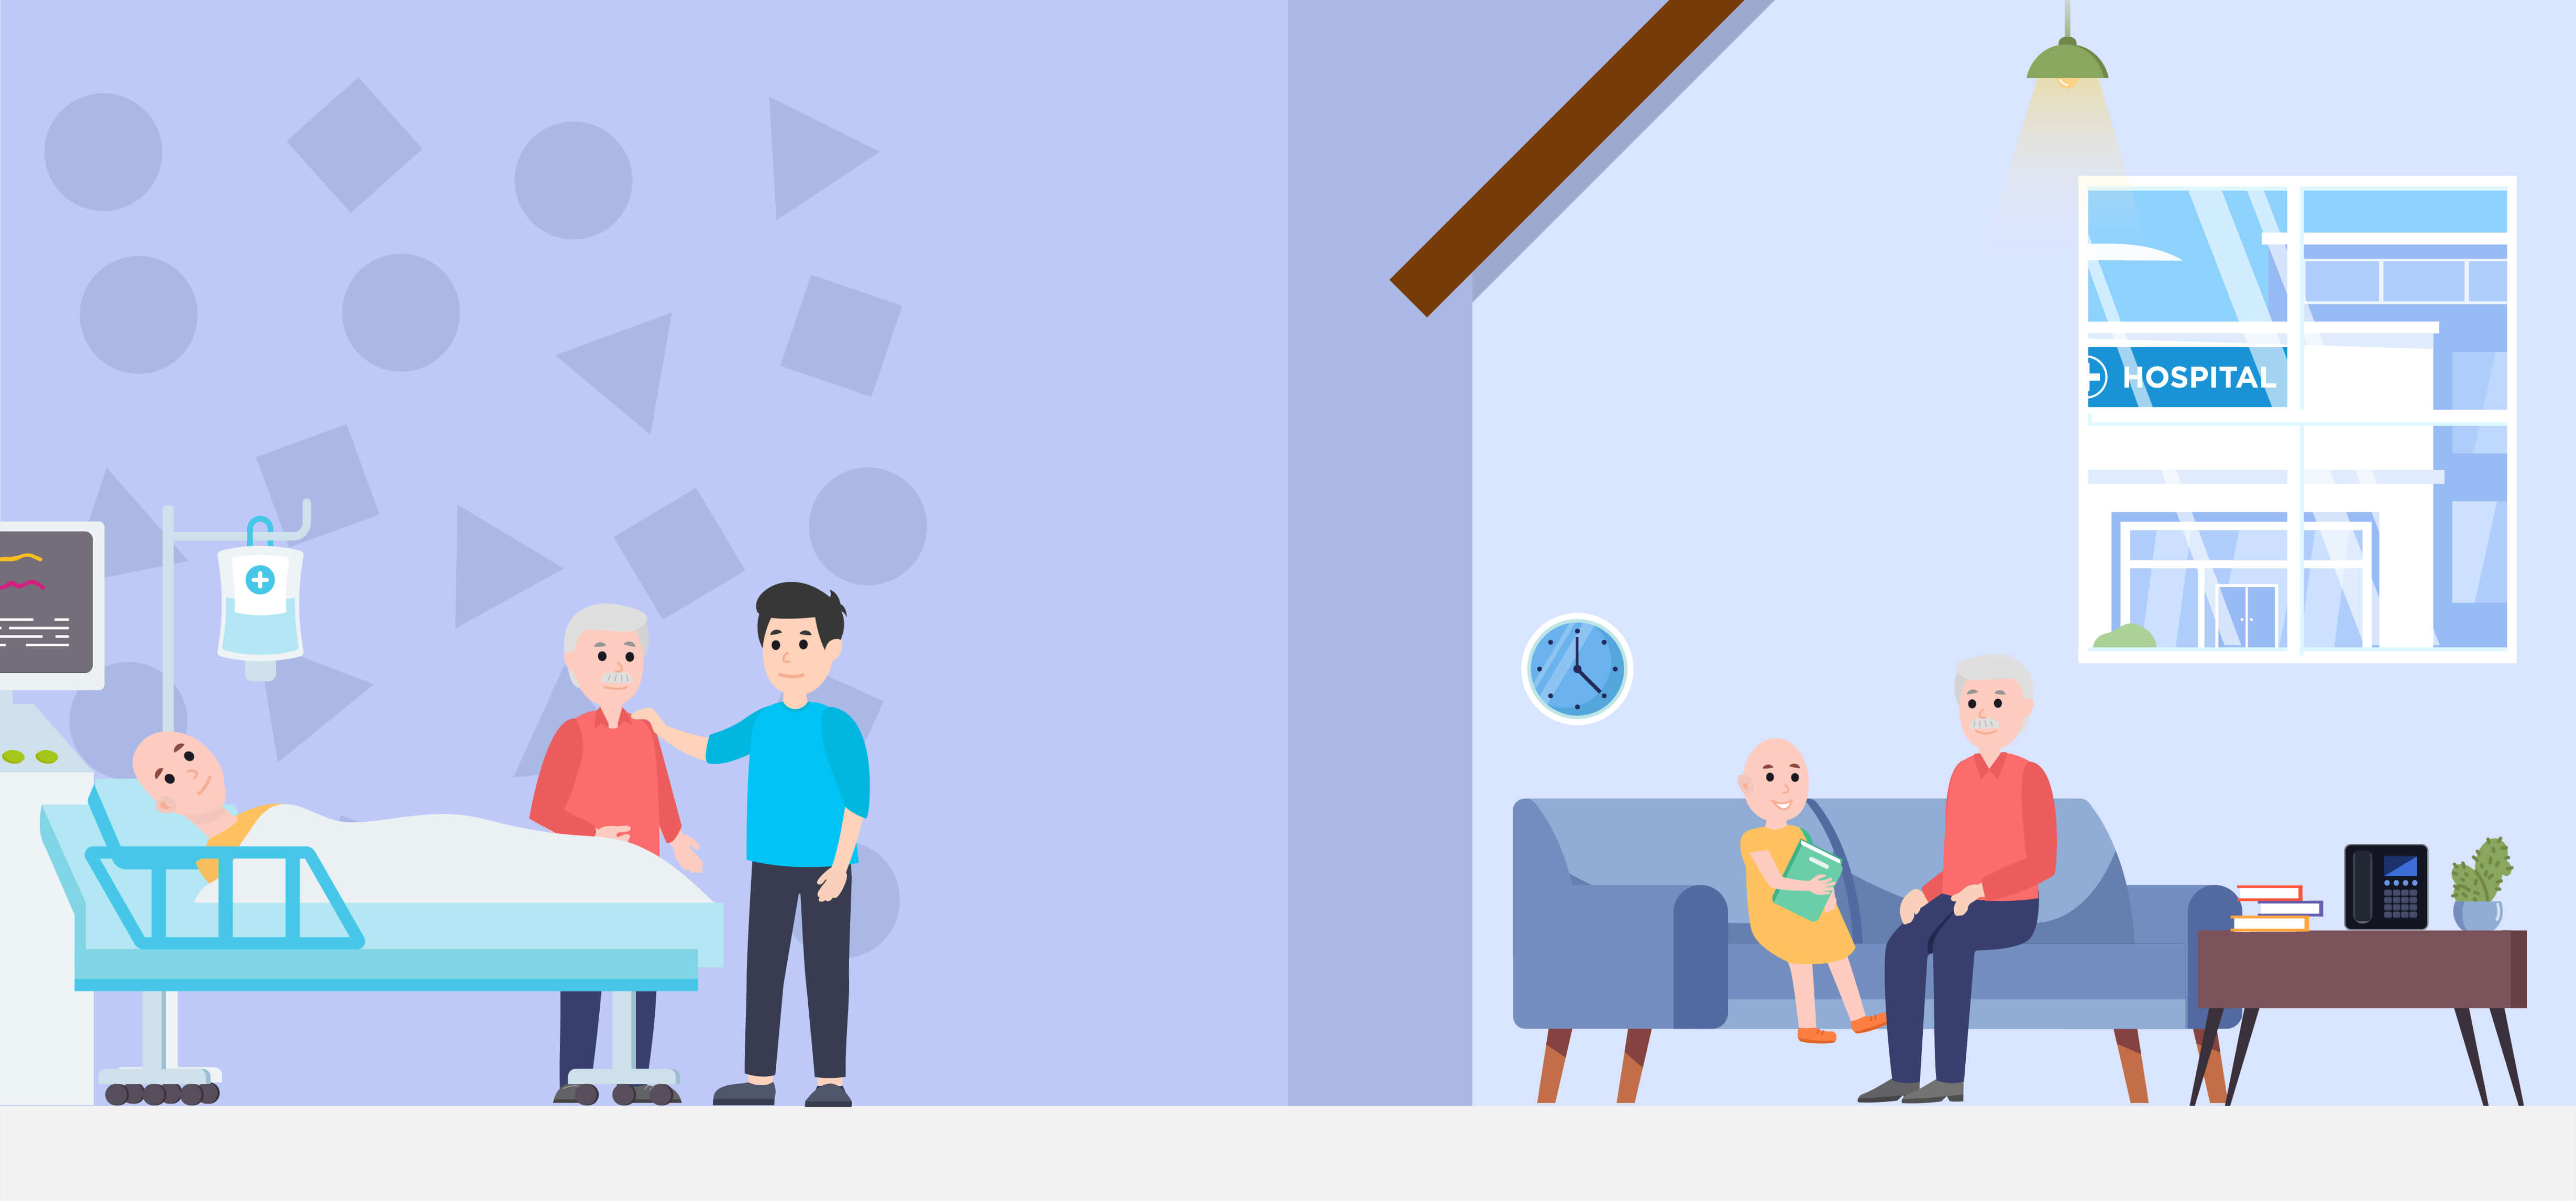 Graphic of Dad and Grandad standing next to a child in a hospital bed on one side and the other a Grandad sitting on a sofa next to a child